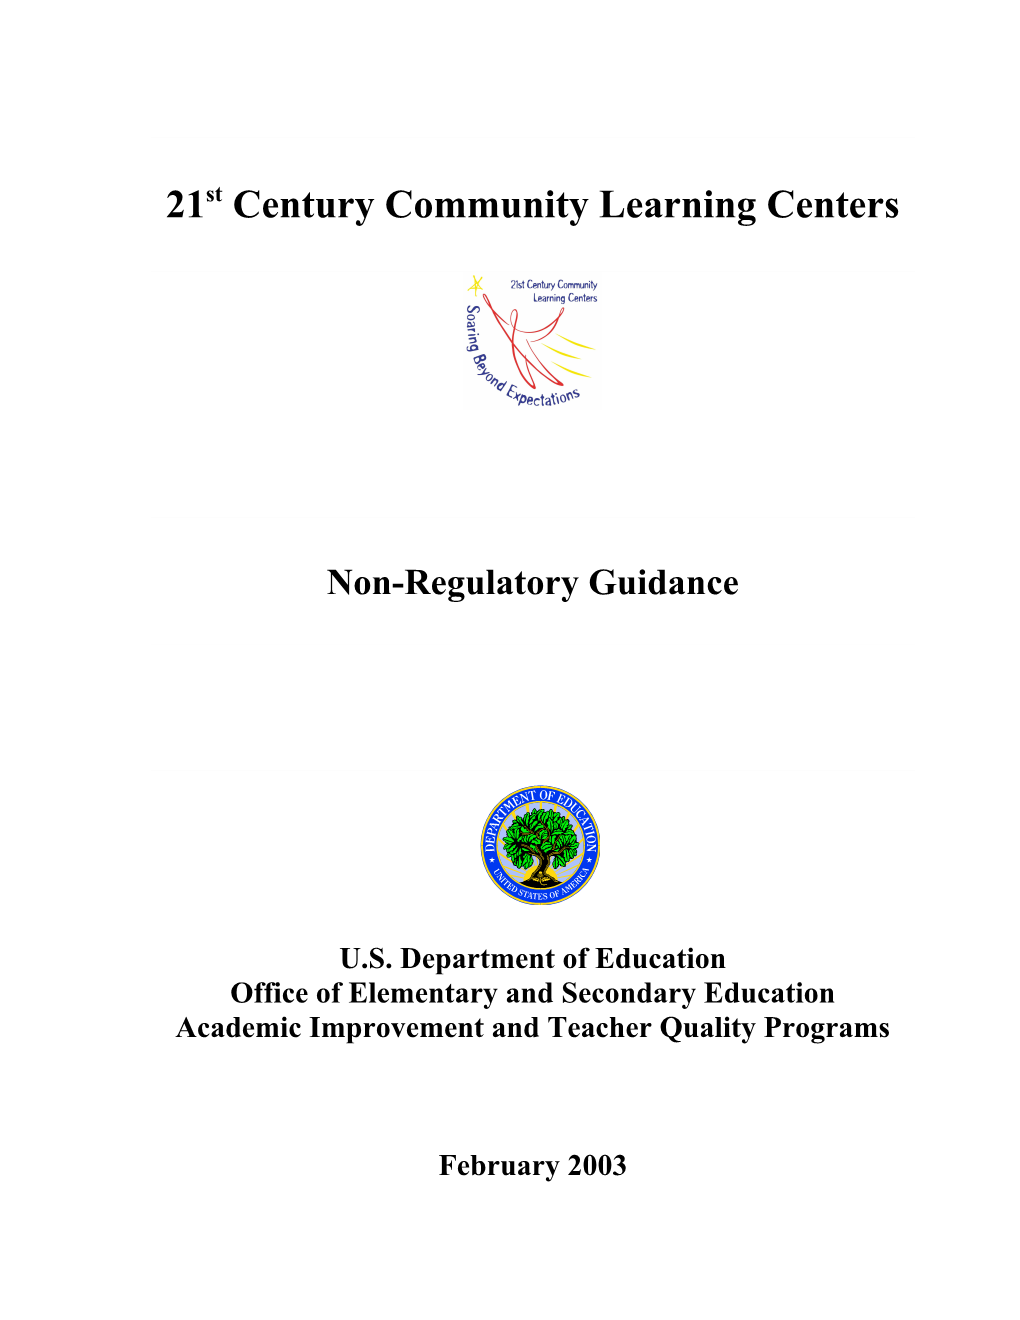 21St Century Community Learning Centers Non-Regulatory Guidance (MS Word)